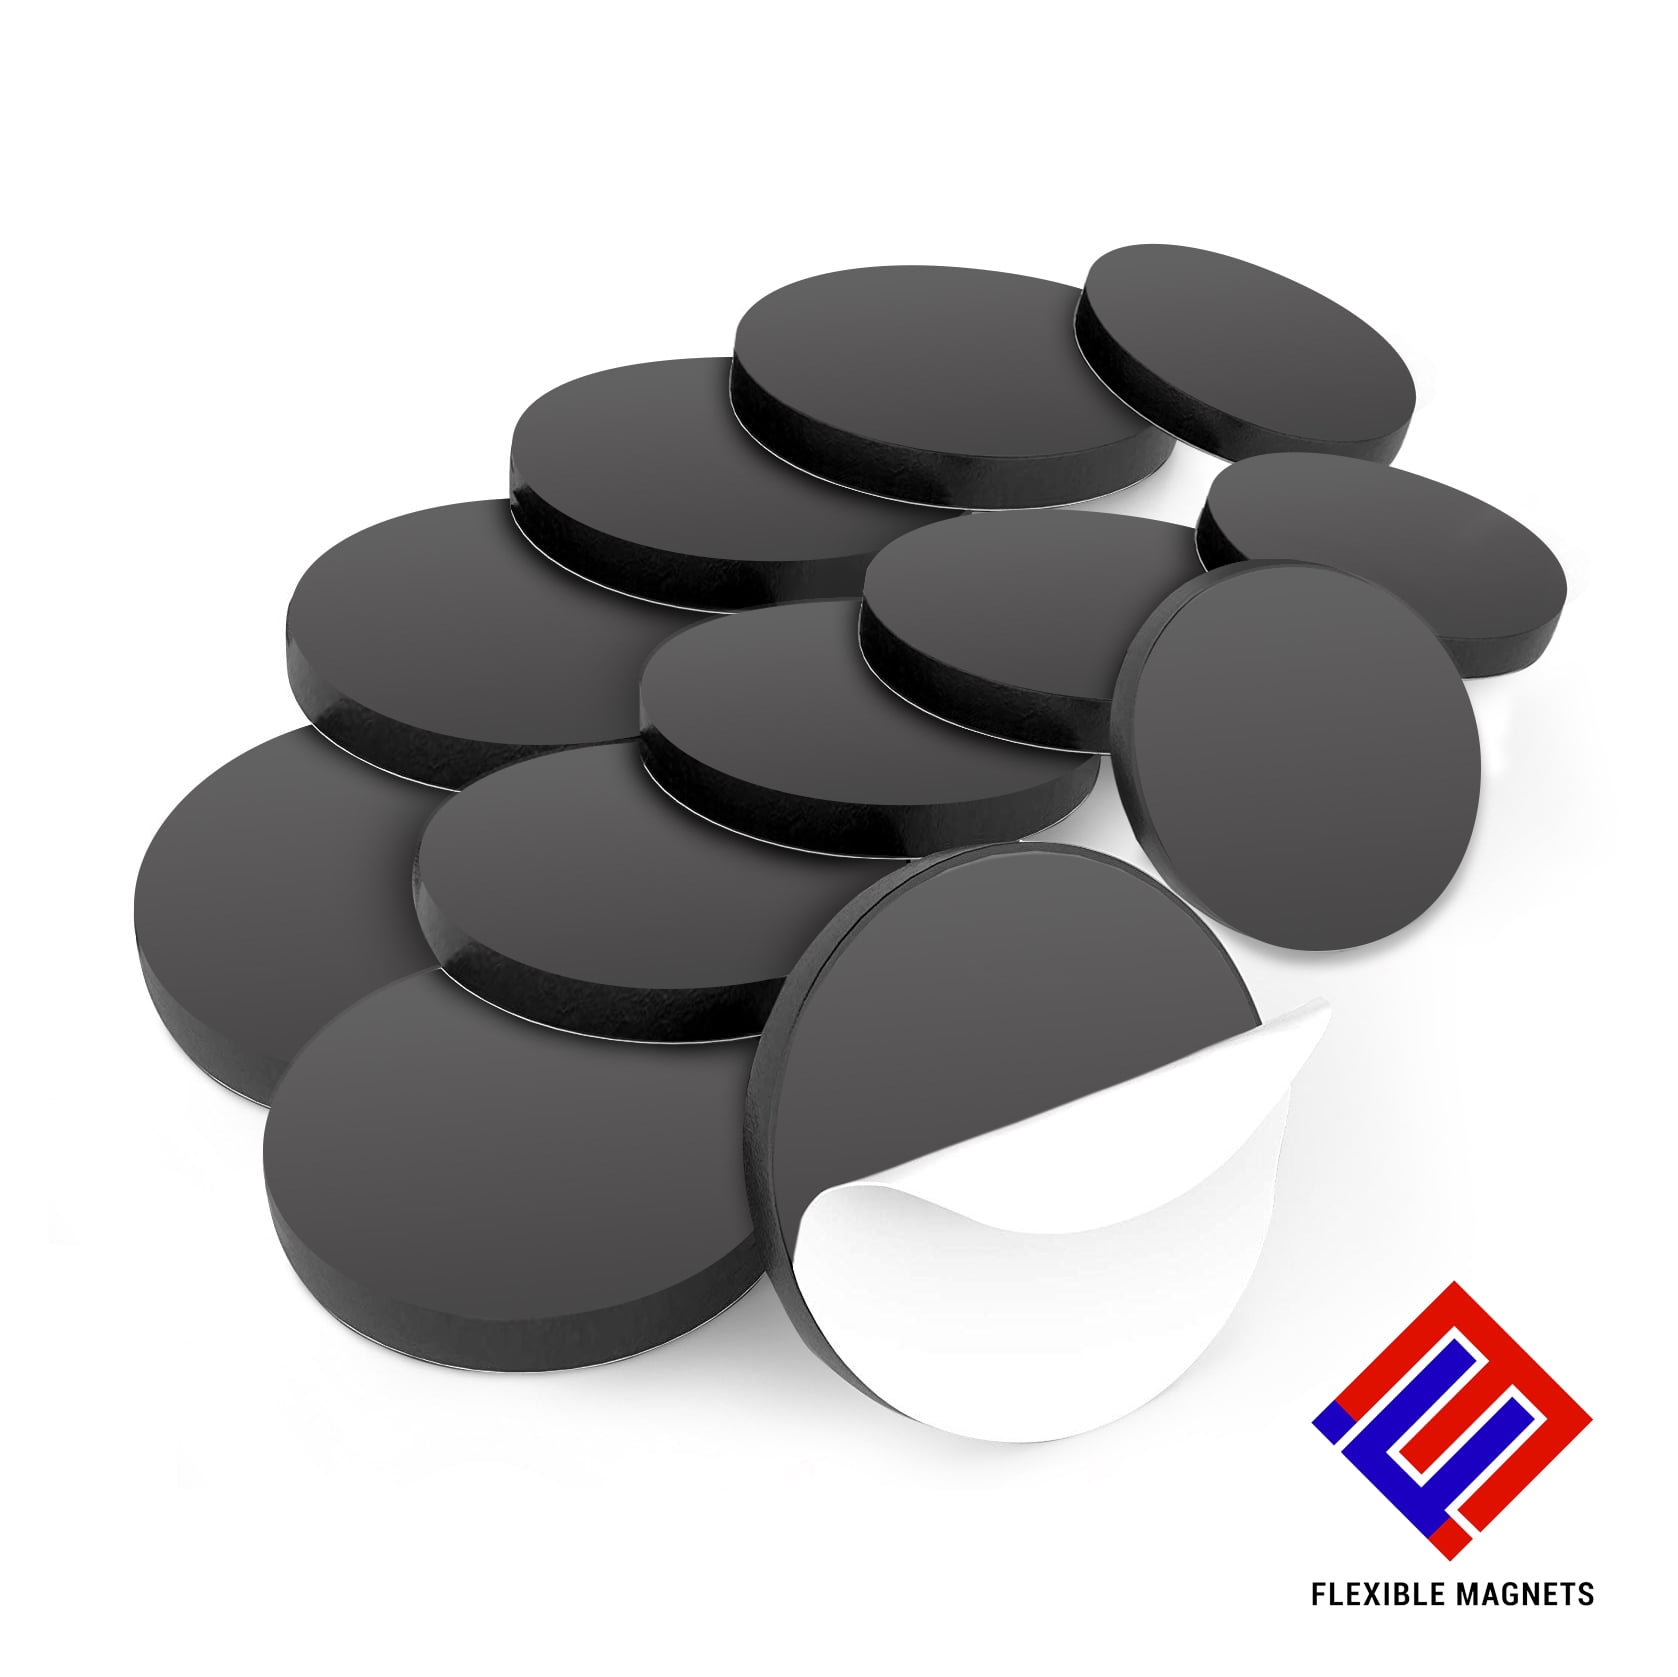 Round Magnet Discs With Adhesive Backing - 30 pieces (1/2 inch, inch, 1  inch- 10 pieces of each) Great for Crafts!